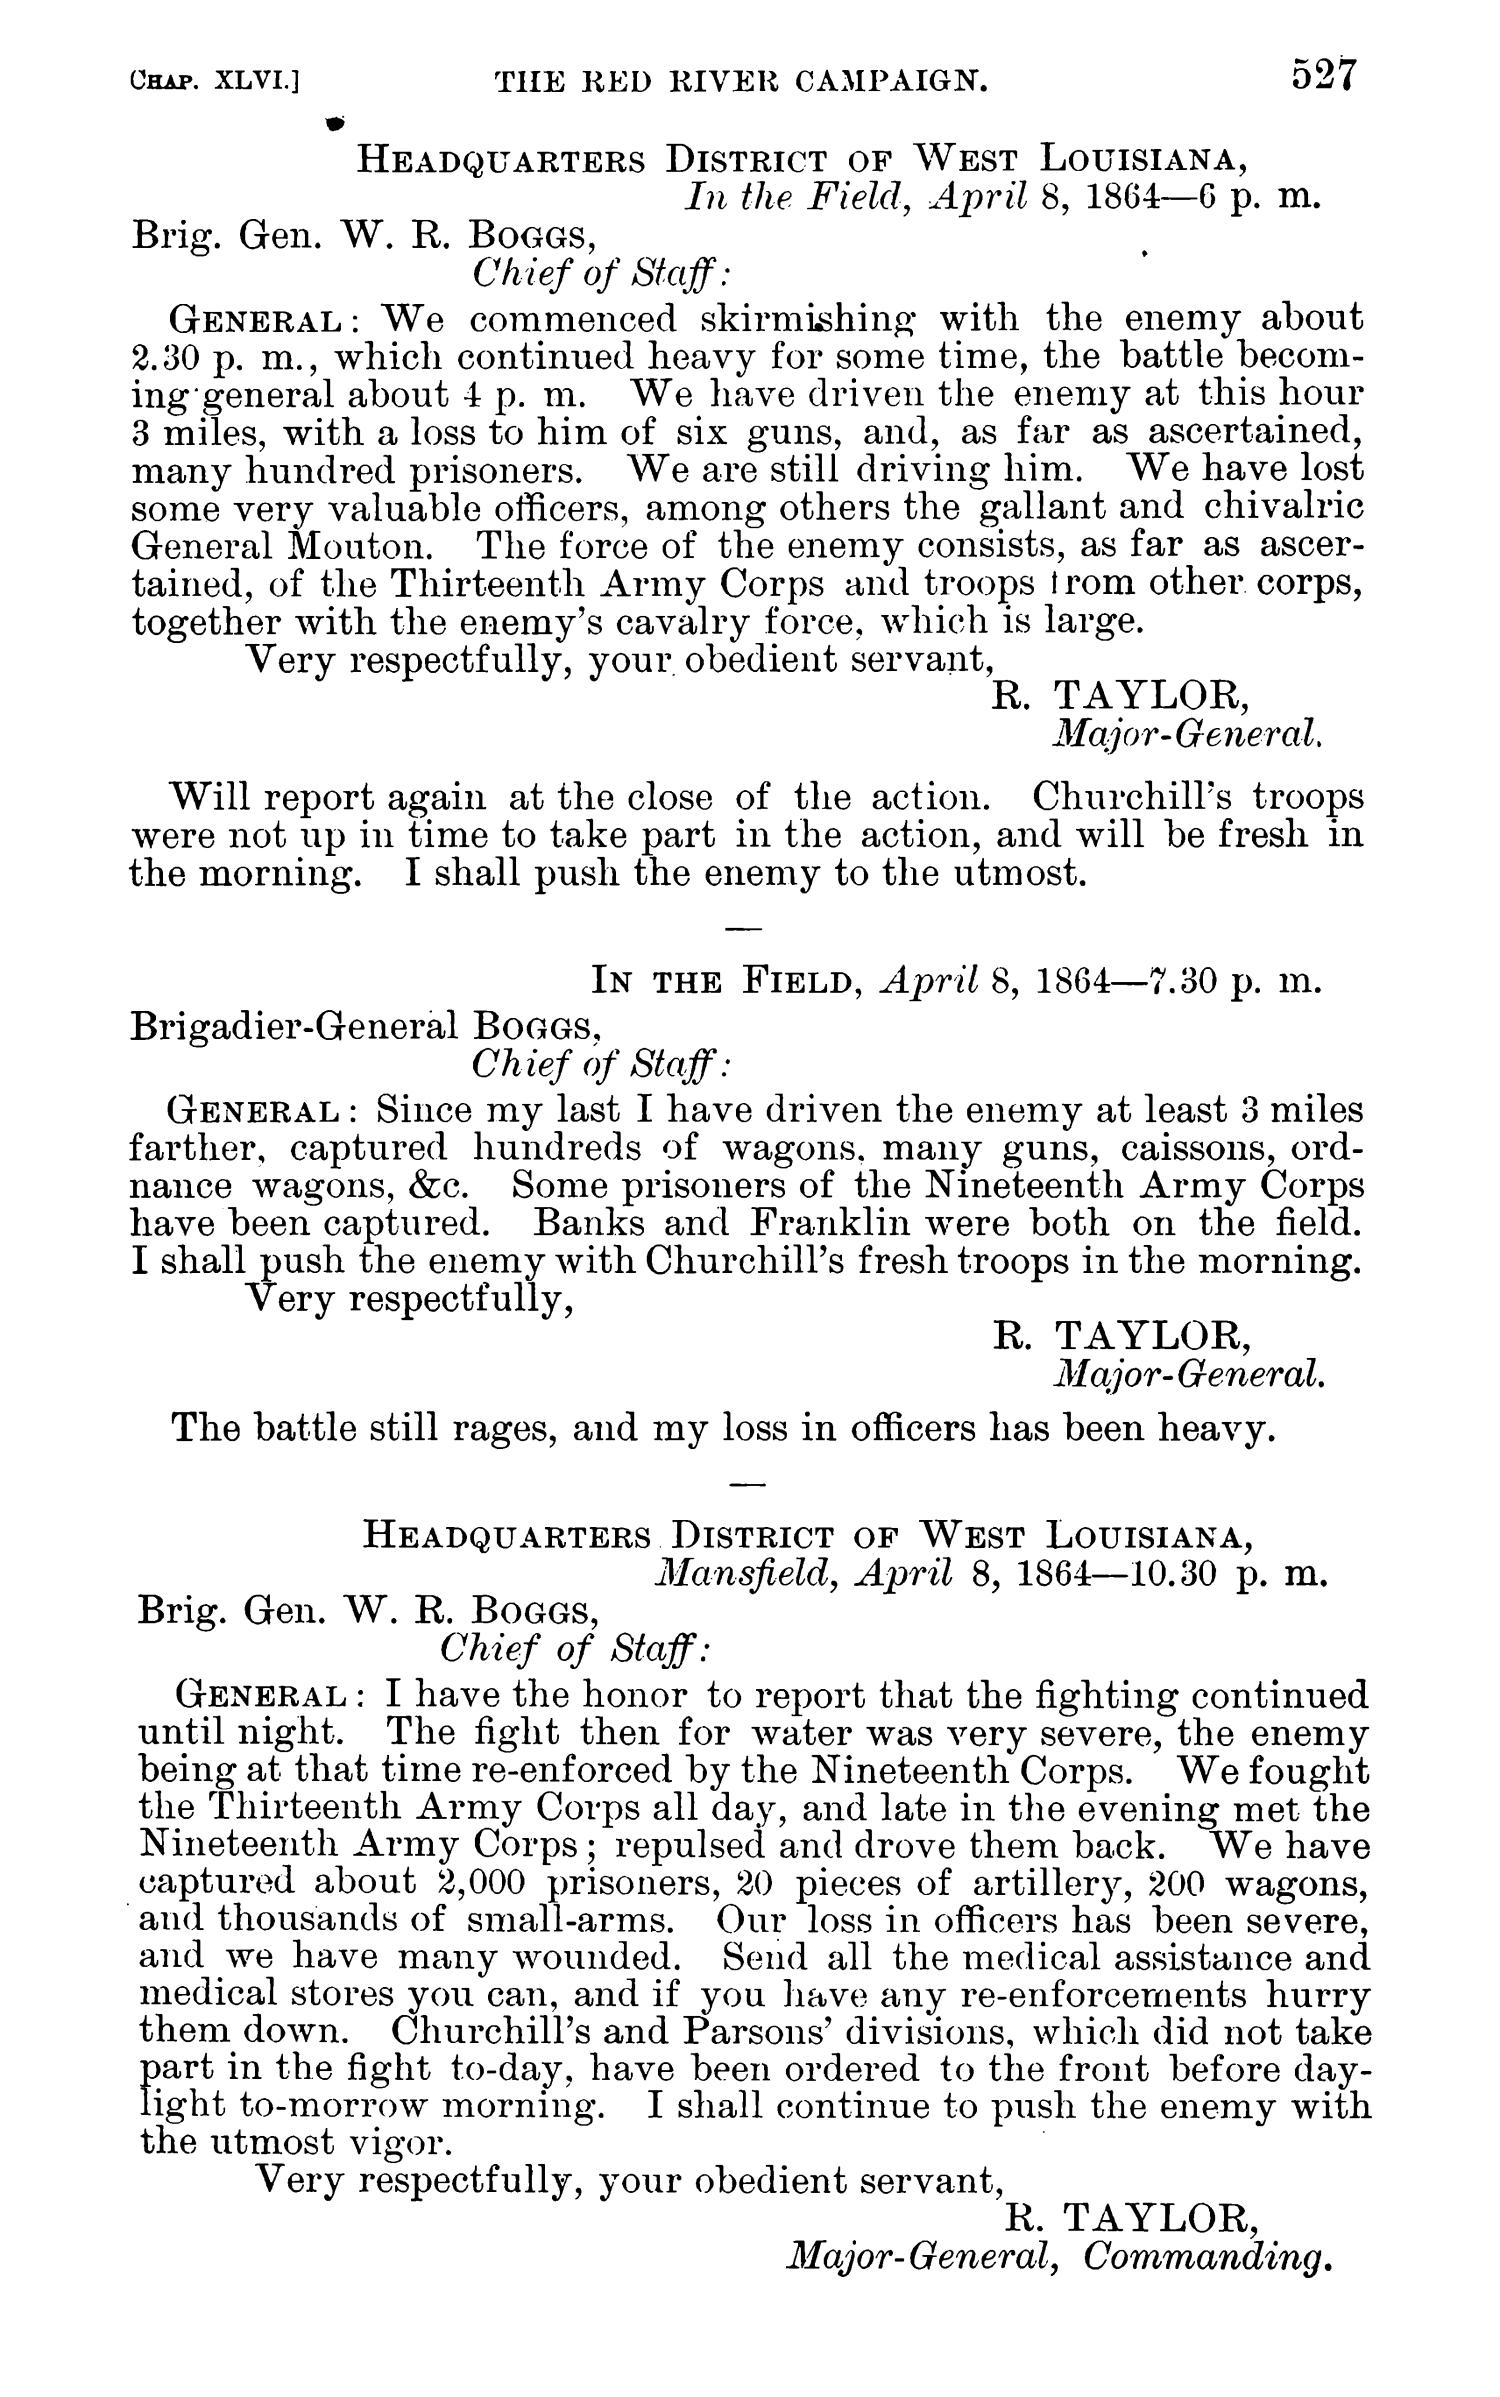 The War of the Rebellion: A Compilation of the Official Records of the Union And Confederate Armies. Series 1, Volume 34, In Four Parts. Part 1, Reports.
                                                
                                                    527
                                                